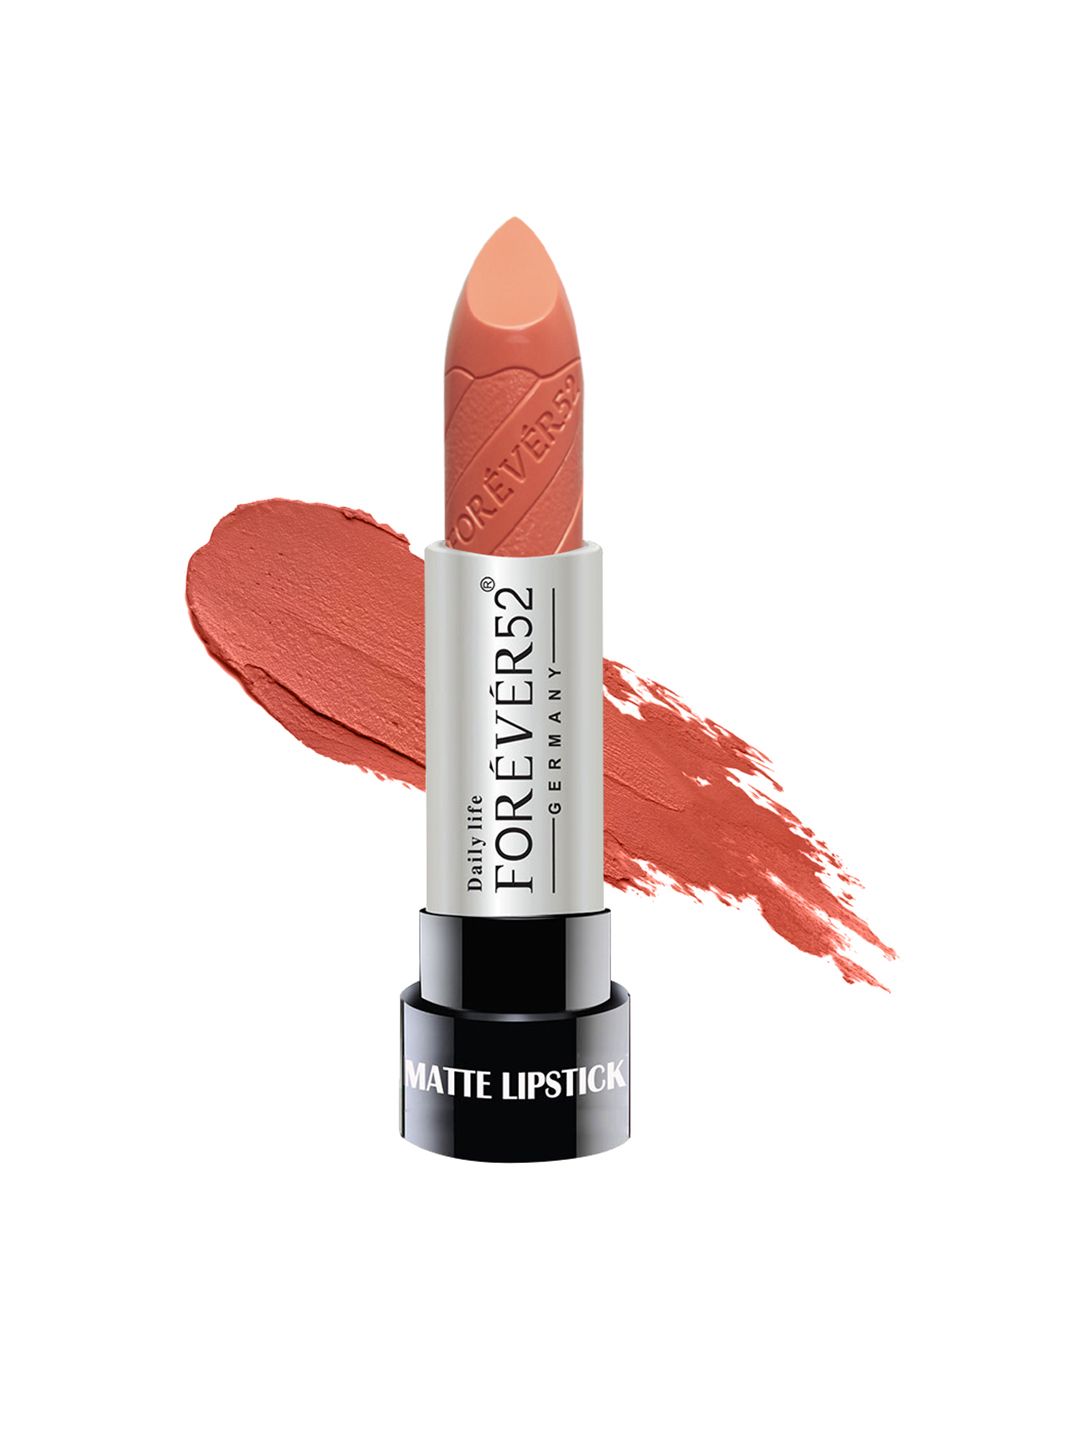 Daily Life Forever52 Candy Apple Matte Lipstick 4 g Price in India